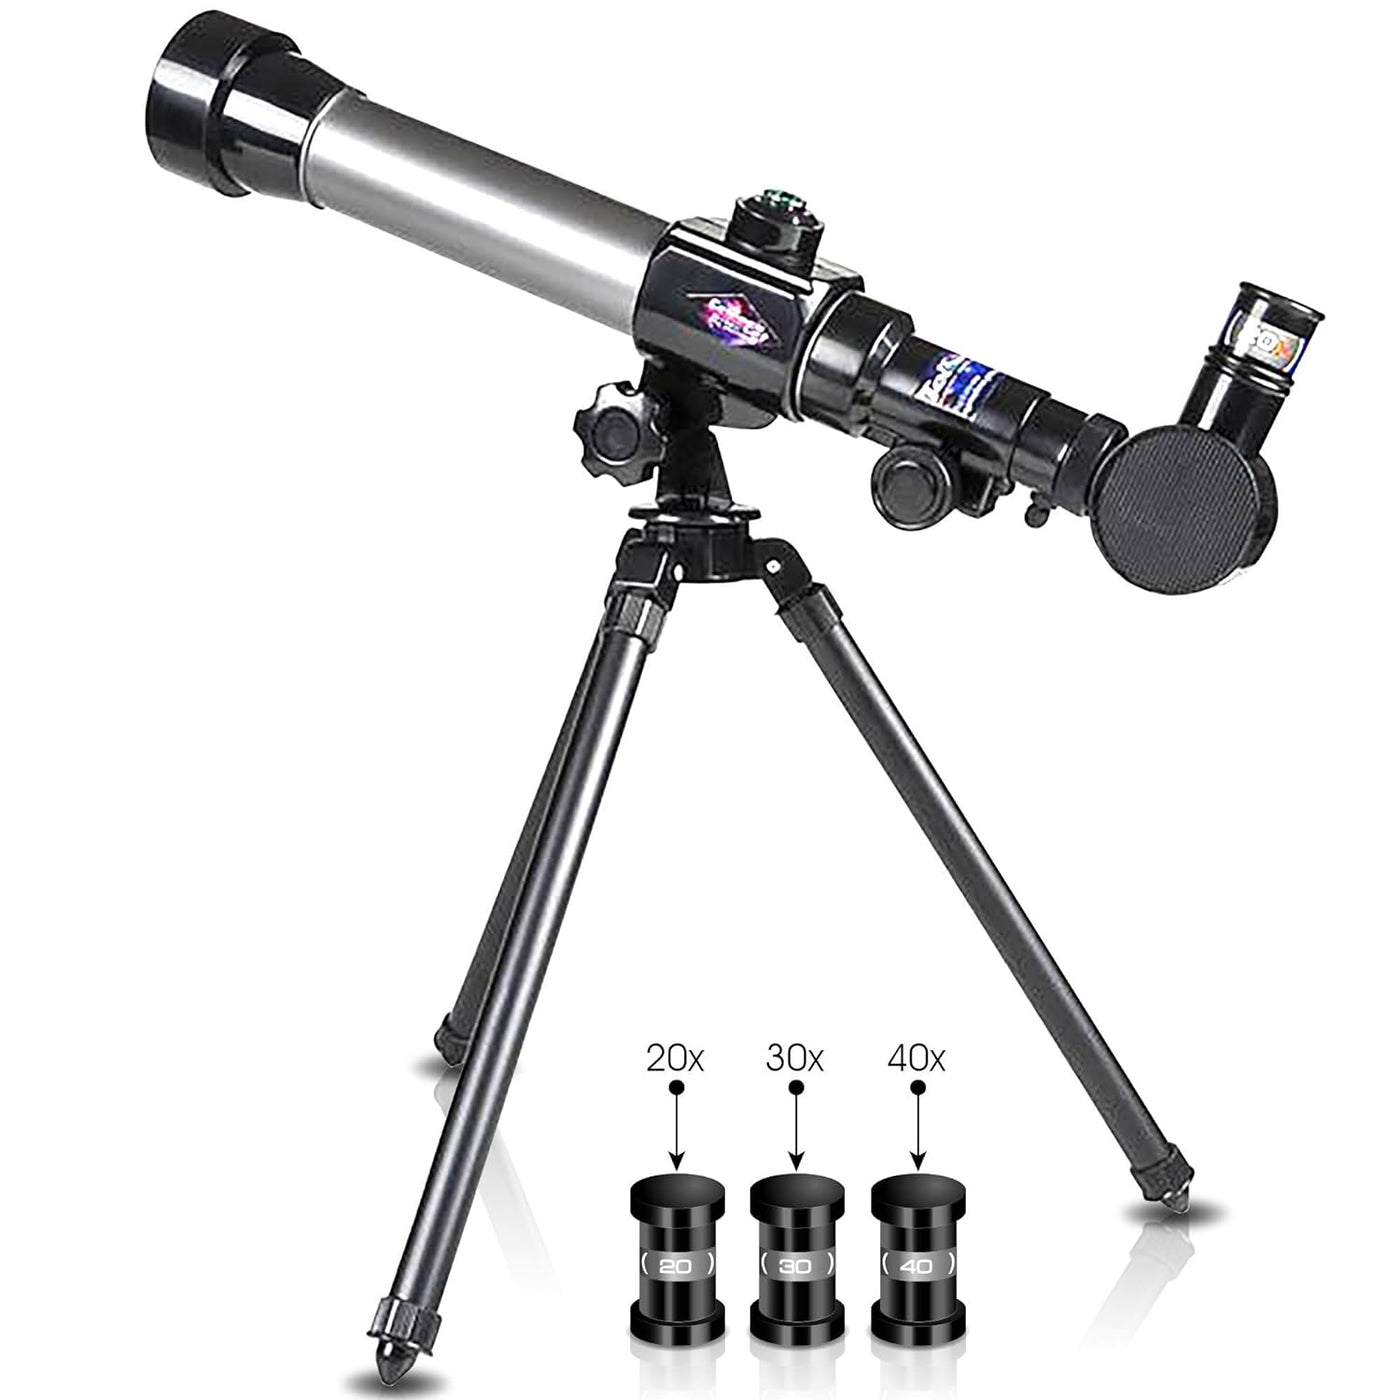 Telescope for Starters - Includes Tripod Stand and 20x, 30x, 40x Eyepieces